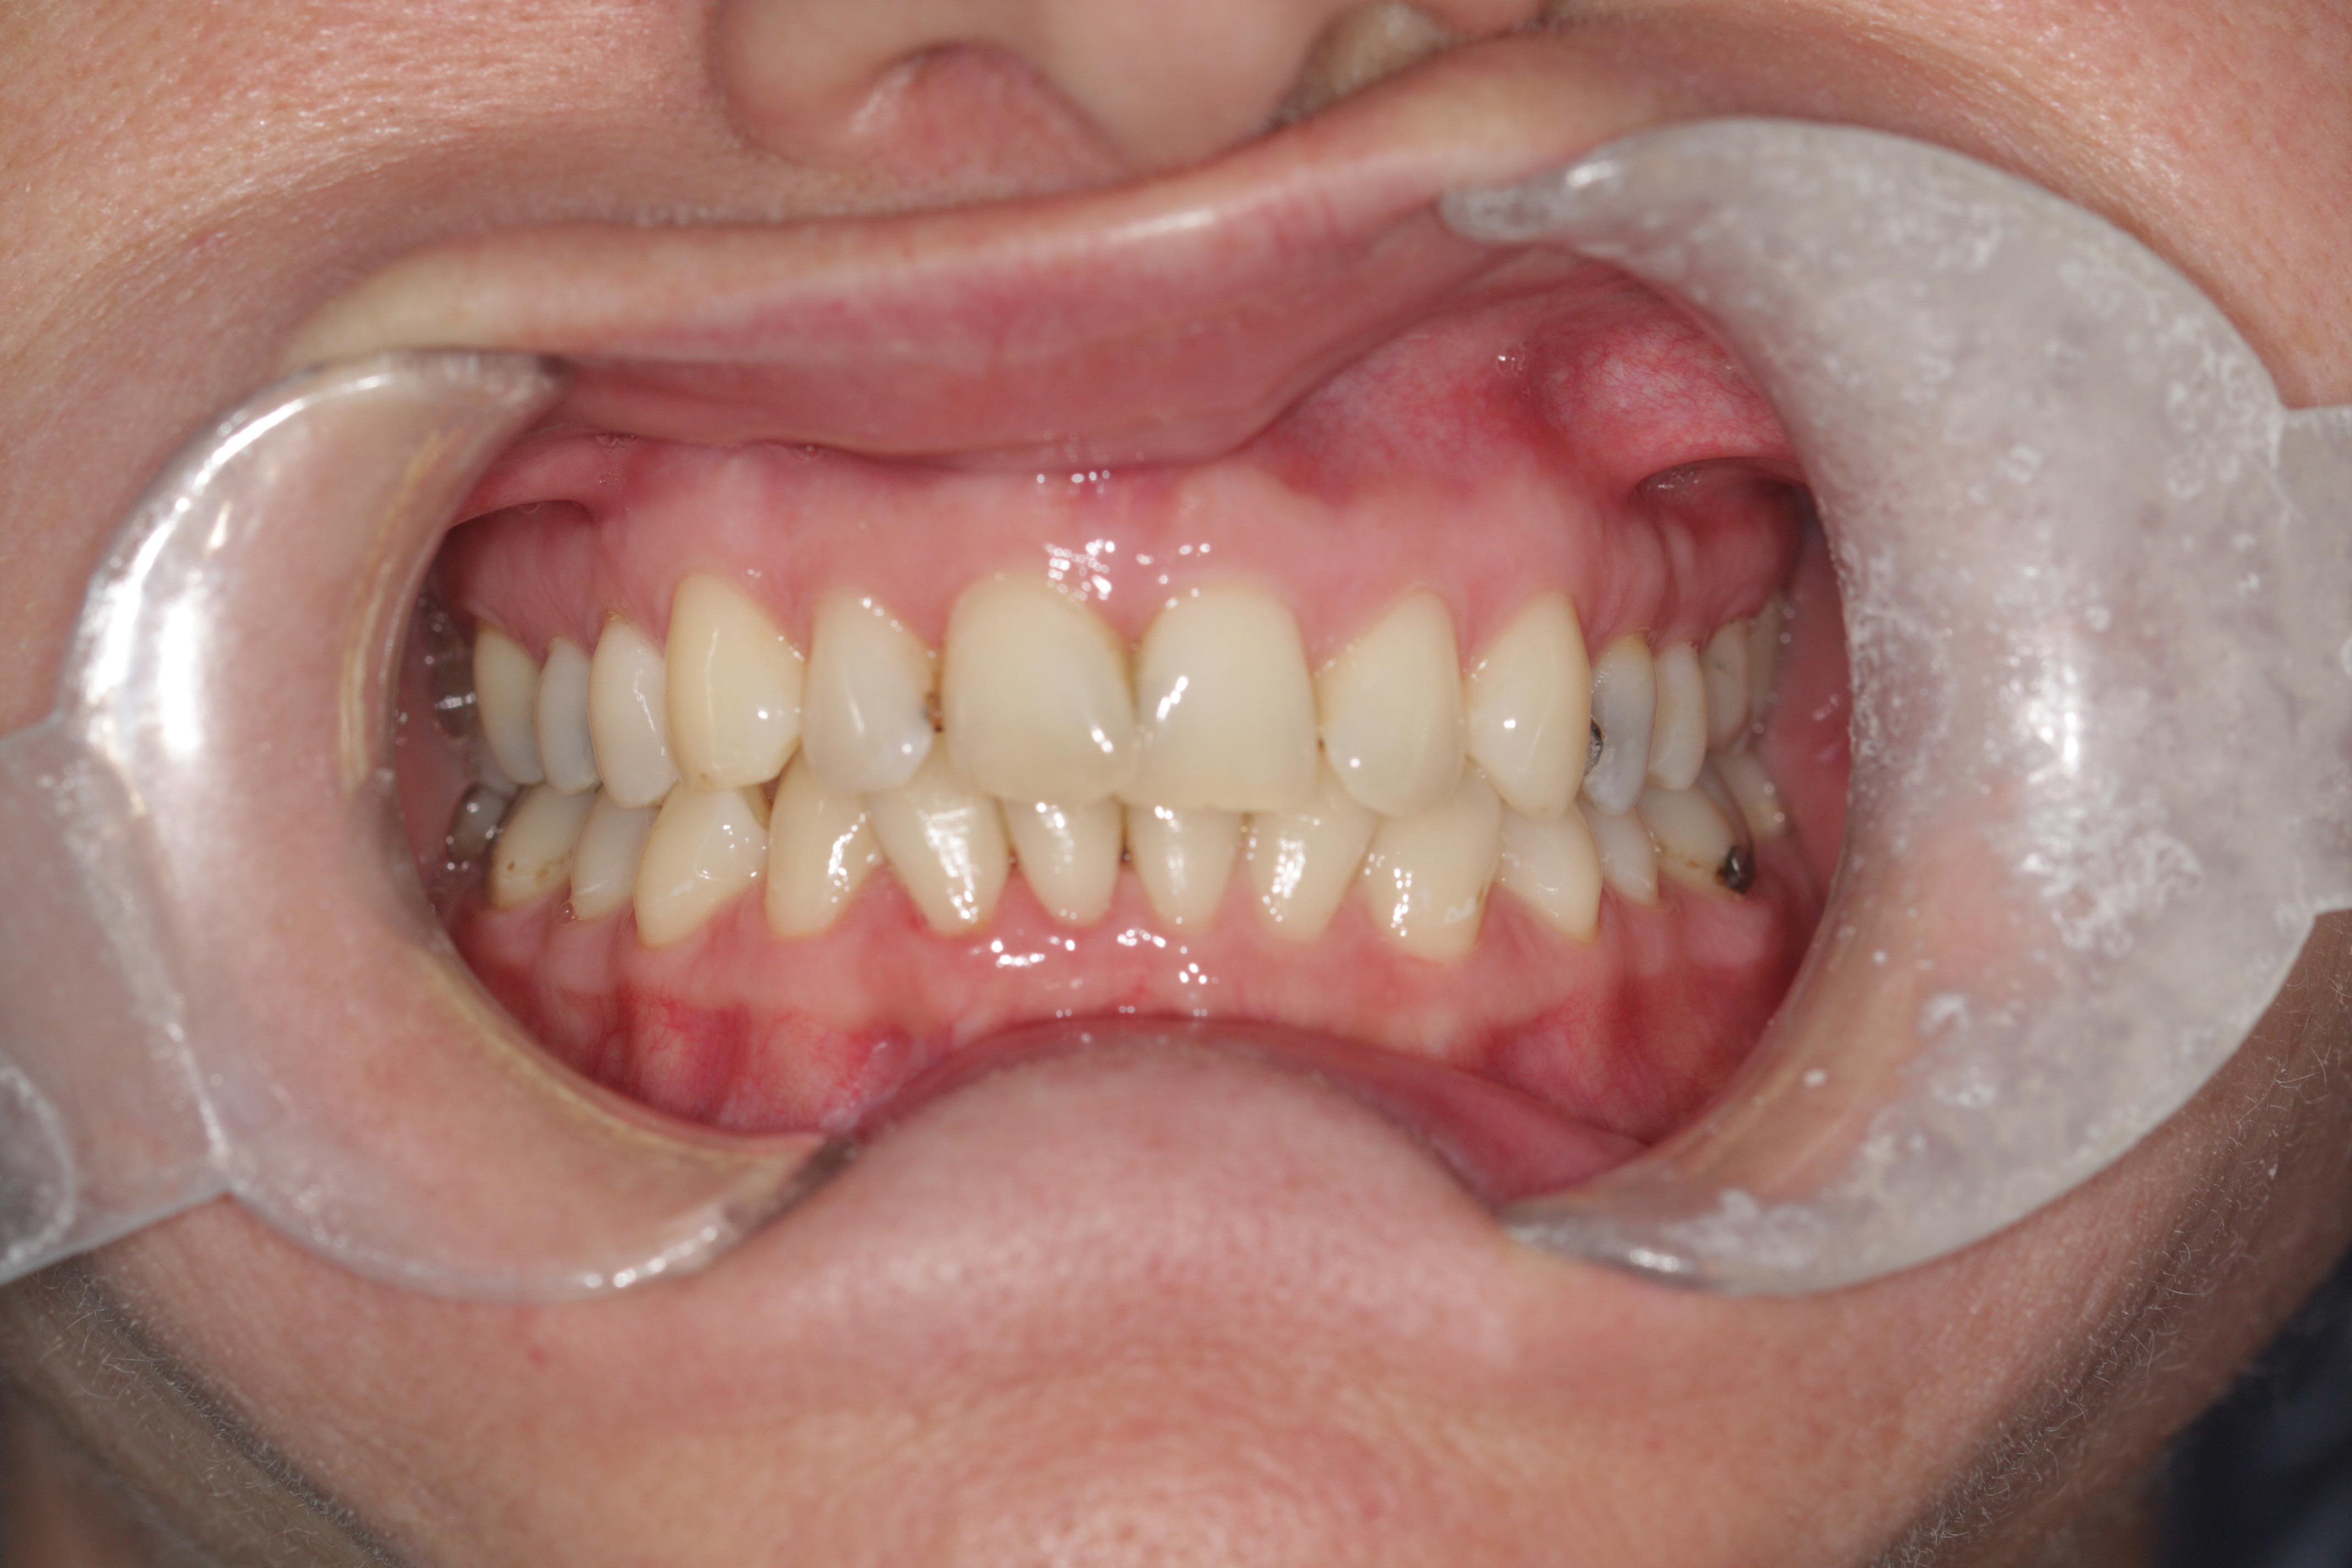 A photo of teeth during an orthodontic treatment.